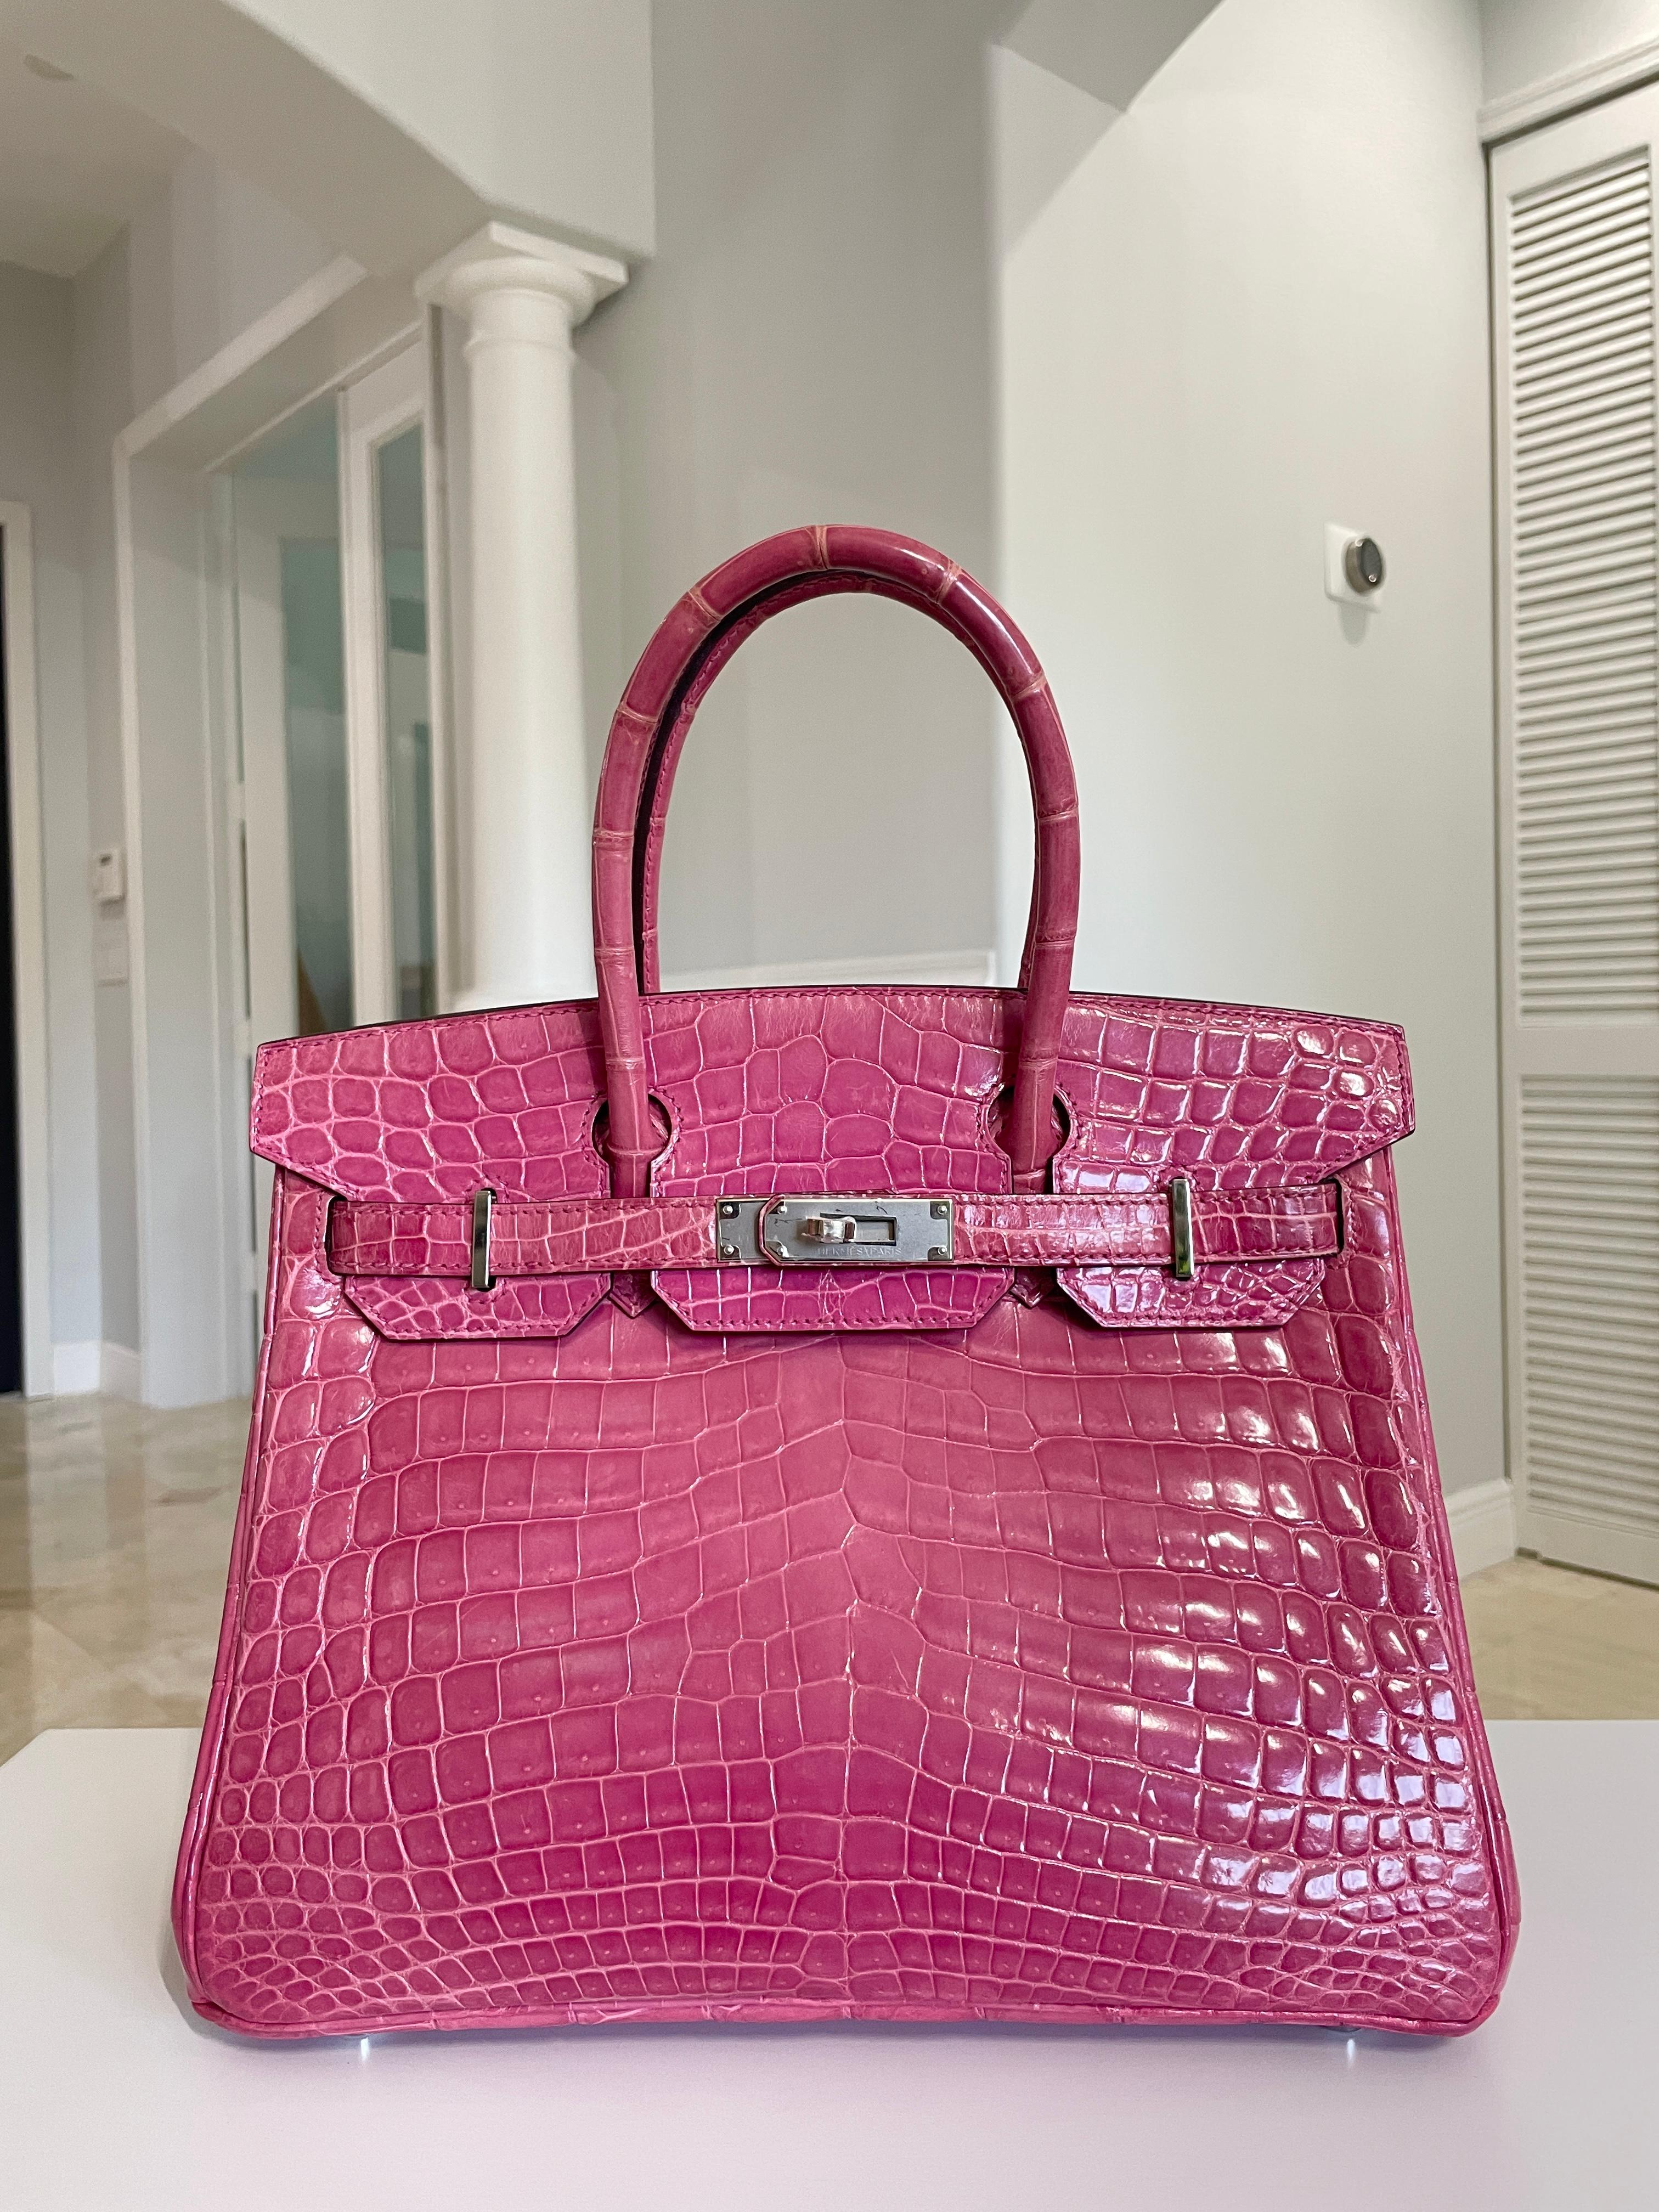 Hermes Birkin 30 Rose Tyrien Pink Crocodile Palladium Hardware. Excellent Condition, replacement Plastic on Hardware, excellent corners and structure. Best Price on eBay! Includes Lock, Clochette and Dust Bag. From Collectors Closet.

Shop with